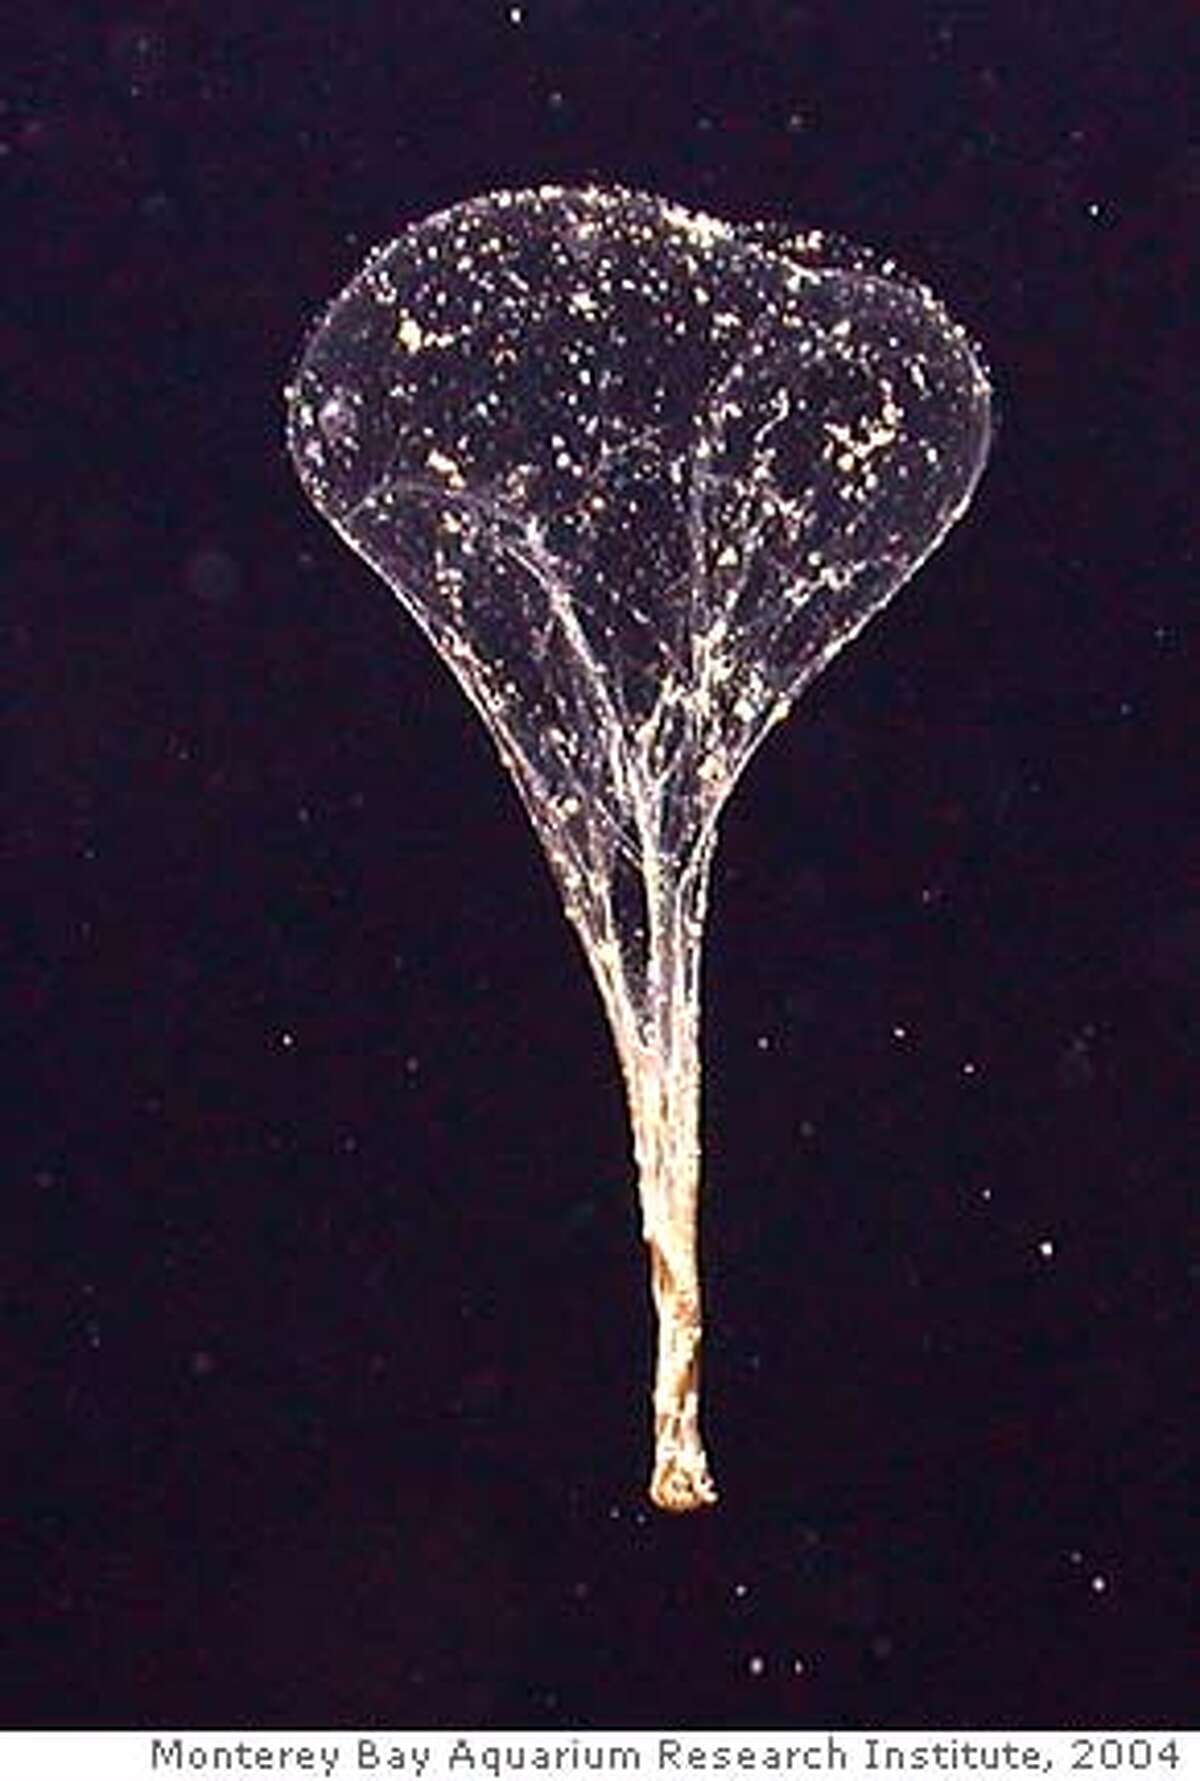 When a larvacean's mucus nets become clogged, the animal swims free. The abandoned nets then collapse like a deflated balloon and sink rapidly, carrying tiny animals and food particles toward the seafloor. Vehicle = TiburonTiburon Dive# = 762Lat= 36.32117844Lon= -122.88875580Depth= 979.2 m Temp= 3.961 C Sal= 34.379 PSU Oxy= 0.36 ml/l Xmiss= 84.4%Source= digitalImages/Tiburon/2004/tibr762/DSCN0462.JPGEpoch seconds= 1100658470Beta timecode= 11:13:27:20